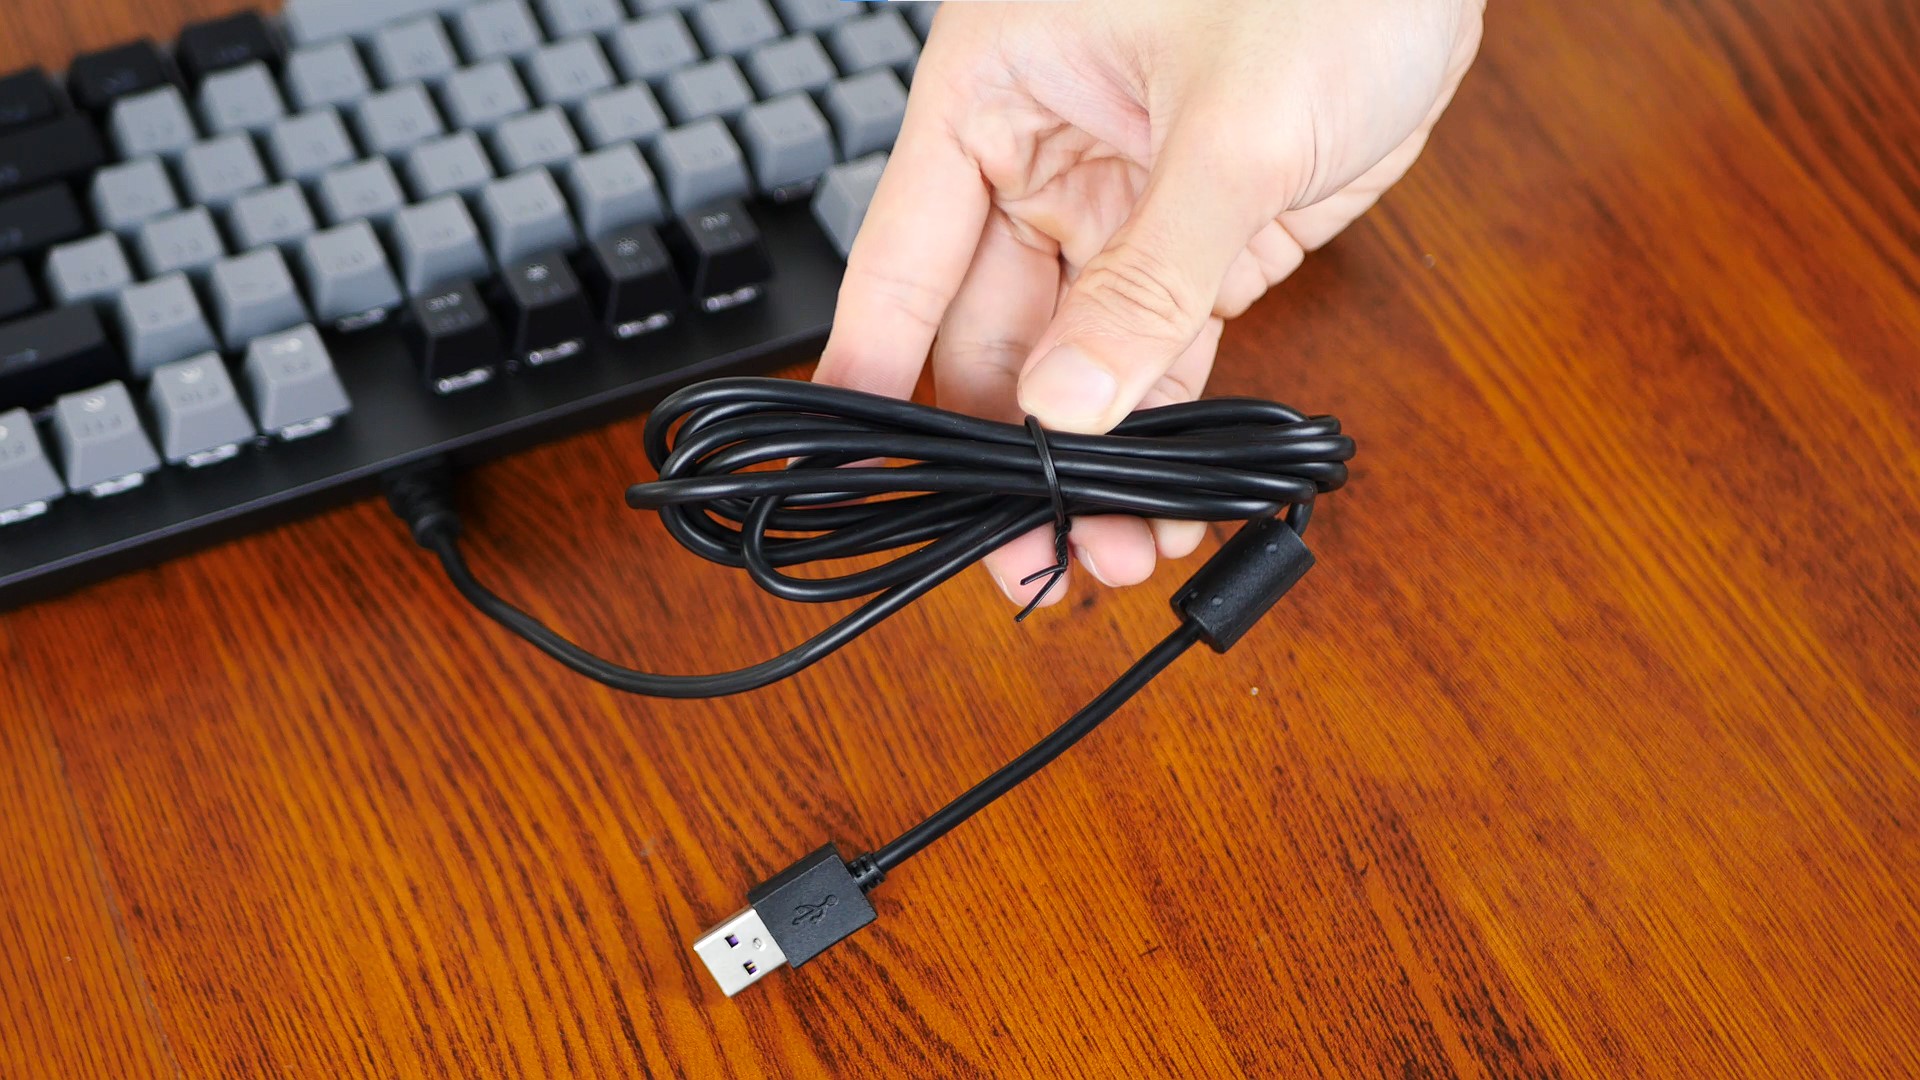 Cooler Master CK352 USB Cable